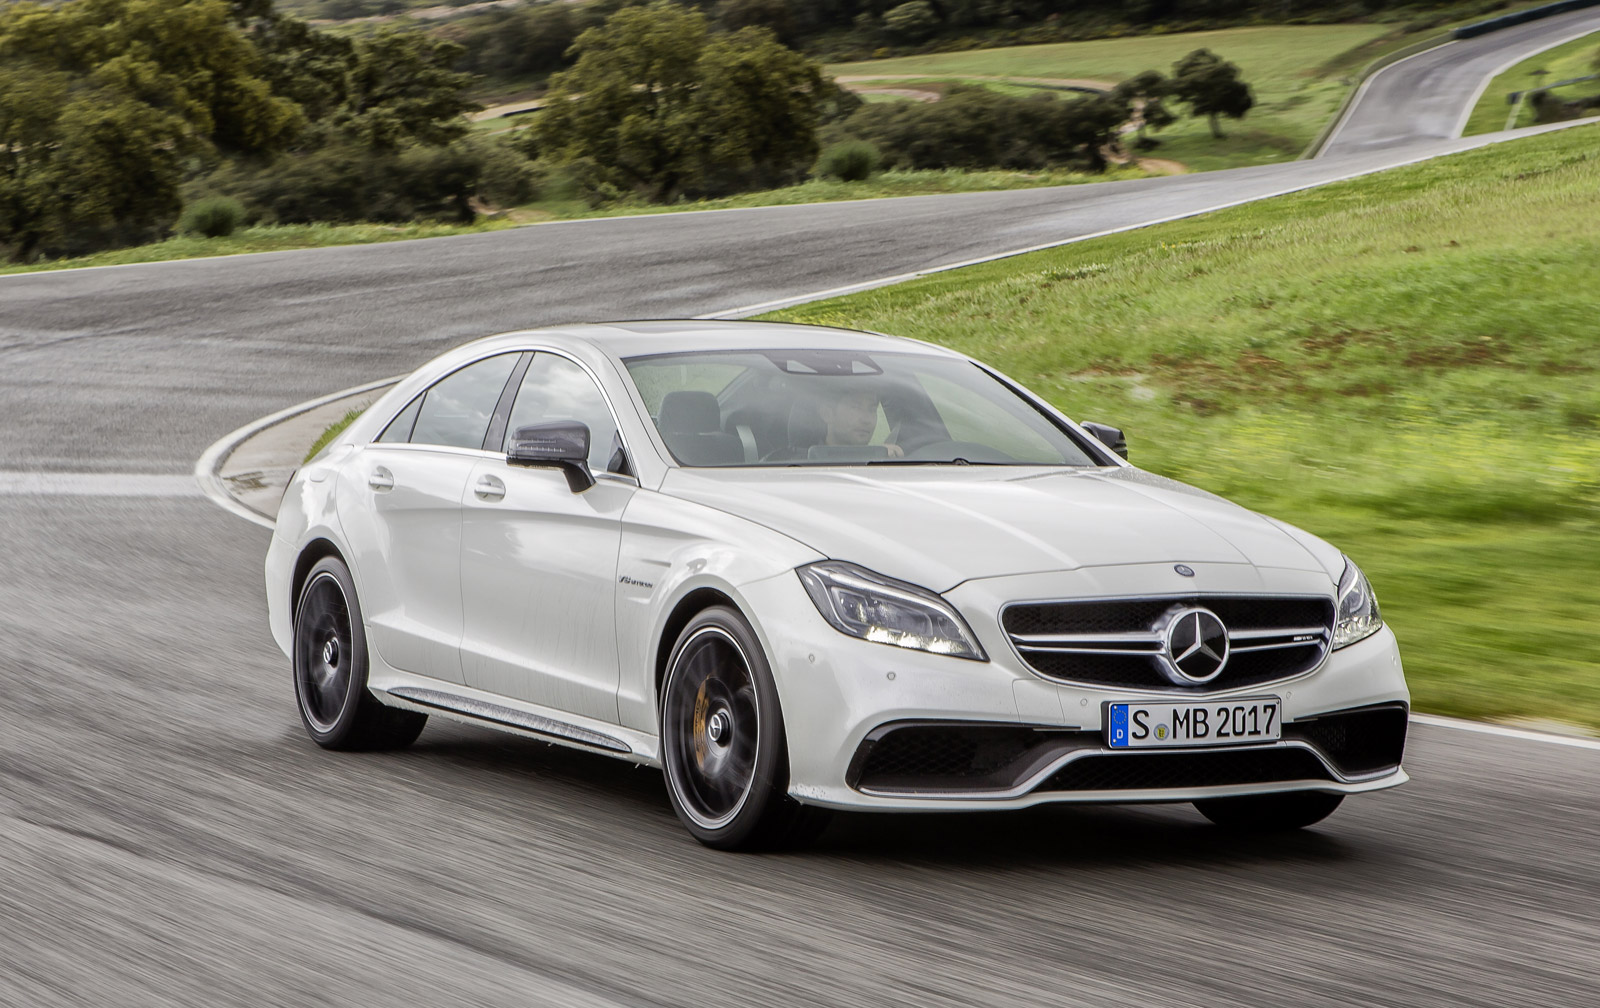 2015 Mercedes-Benz CLS-Class and CLS63 AMG revealed